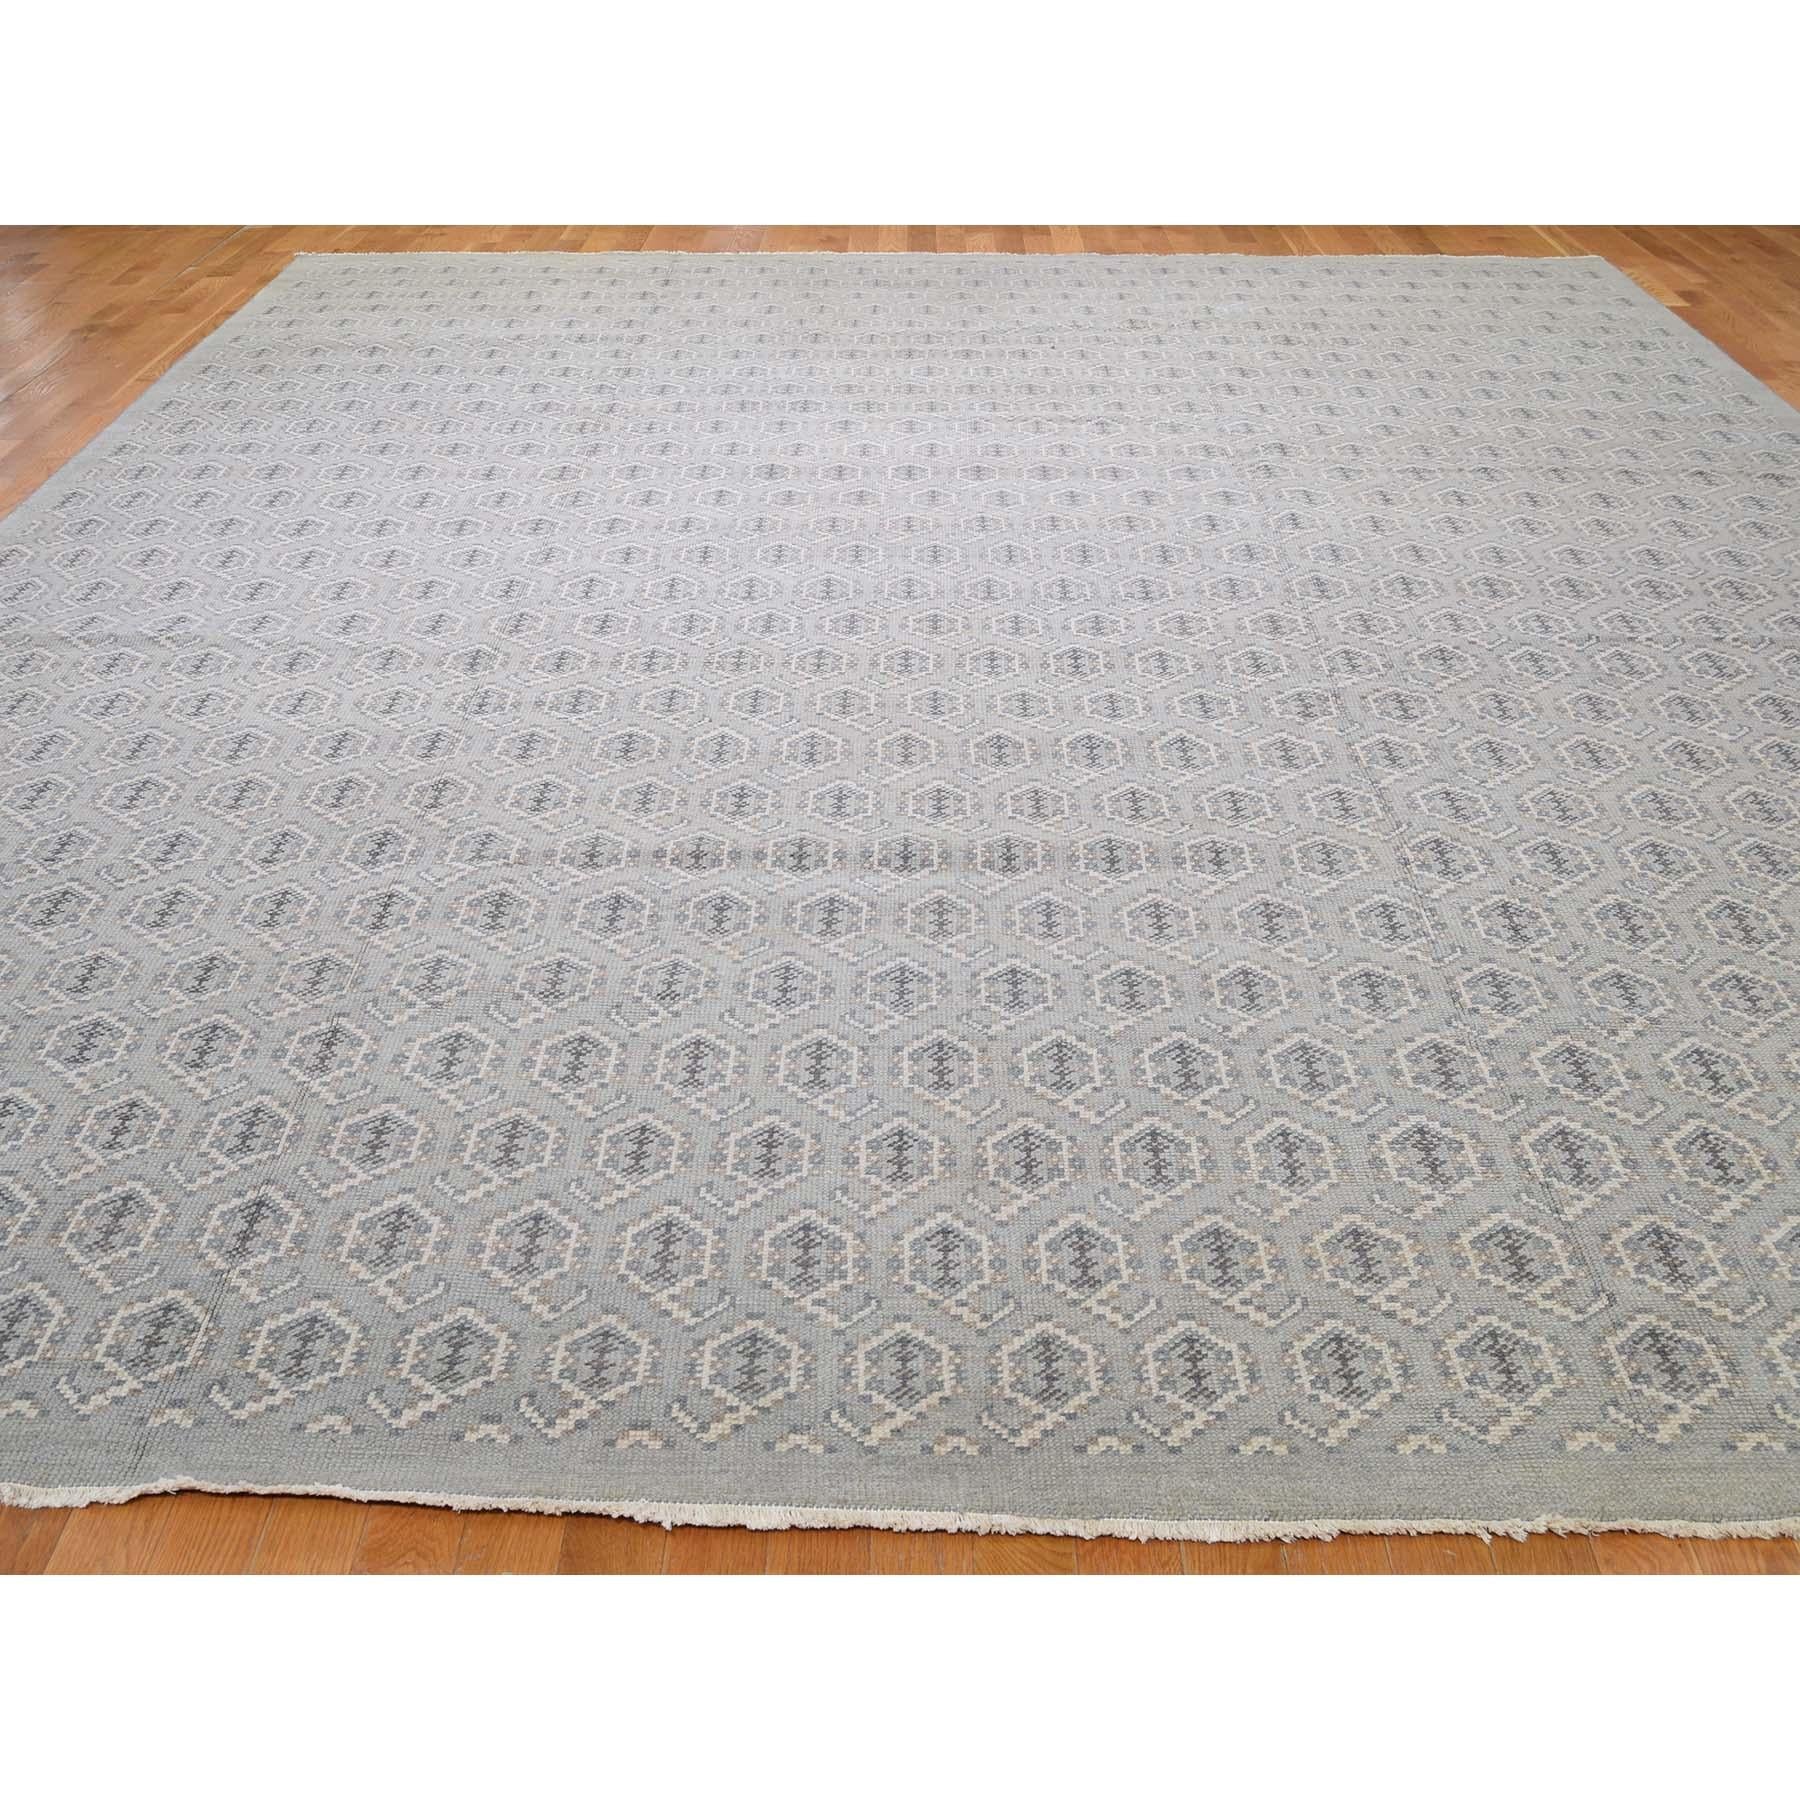 Modern Turkish Knot Paisley Design Oversize Hand Knotted Oriental Rug